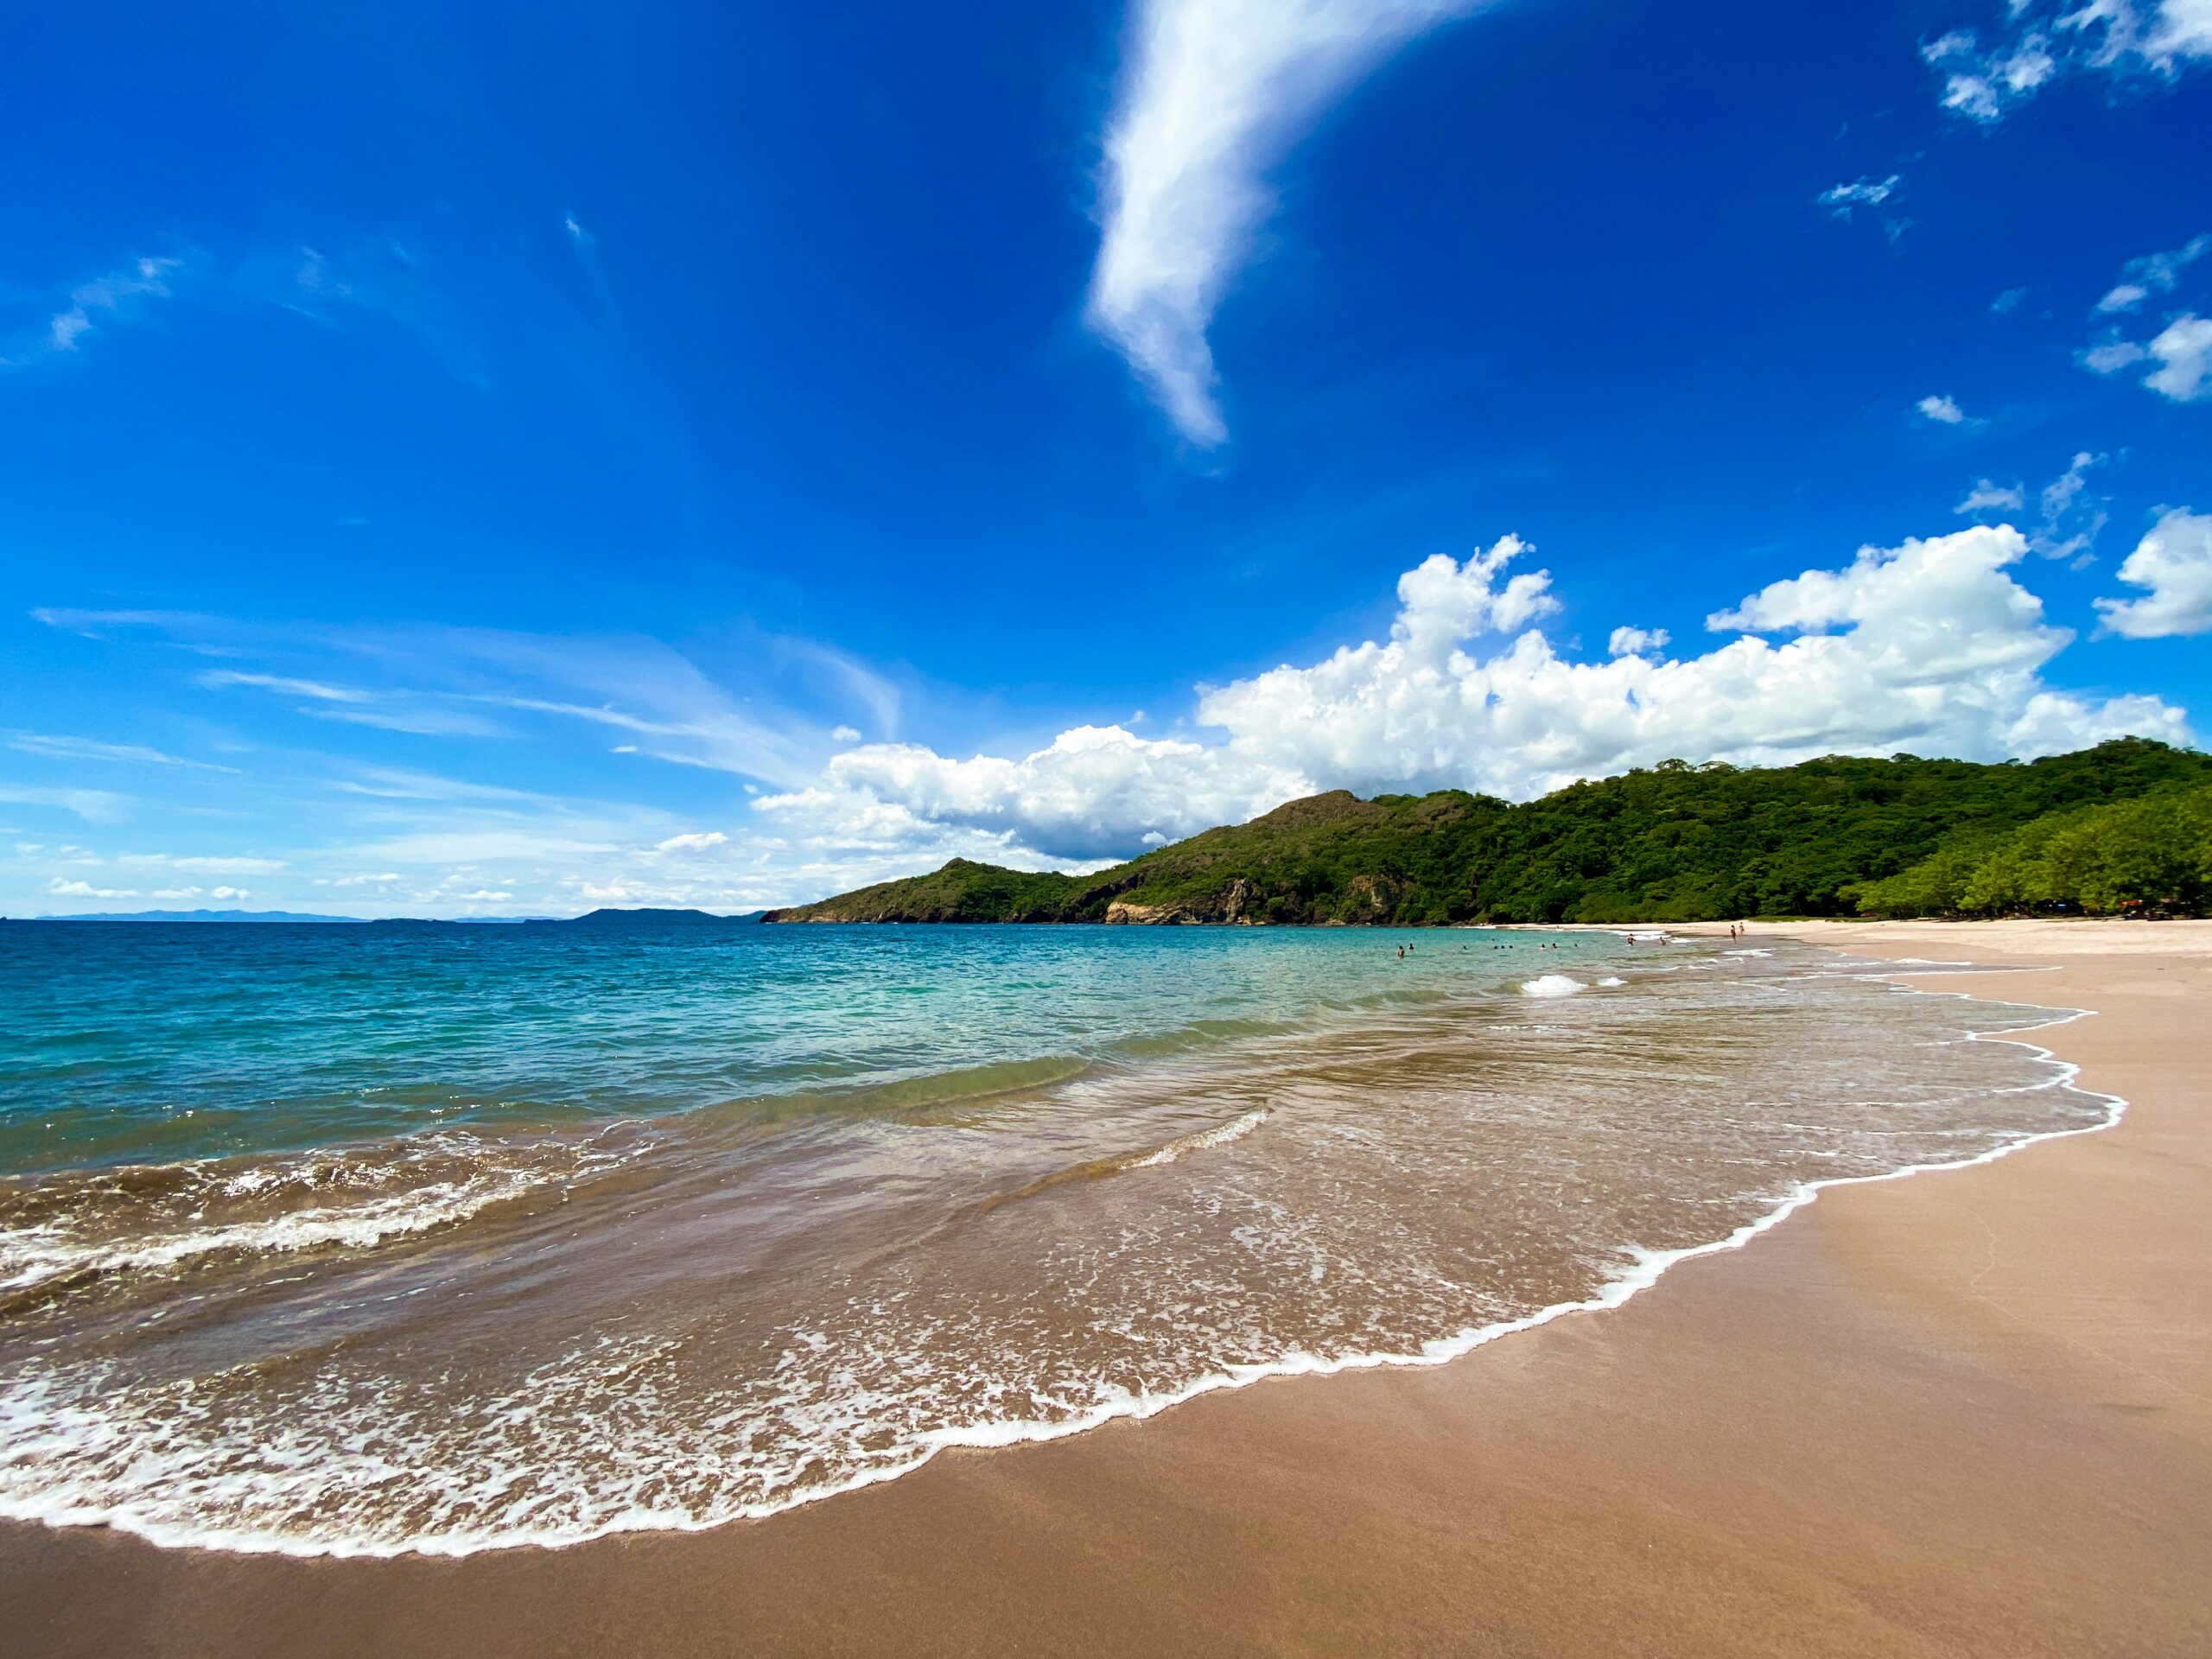 These are the best beaches of Costa Rica.
Pictured: a beach in Costa Rica with turquoise waters and bright blue skies